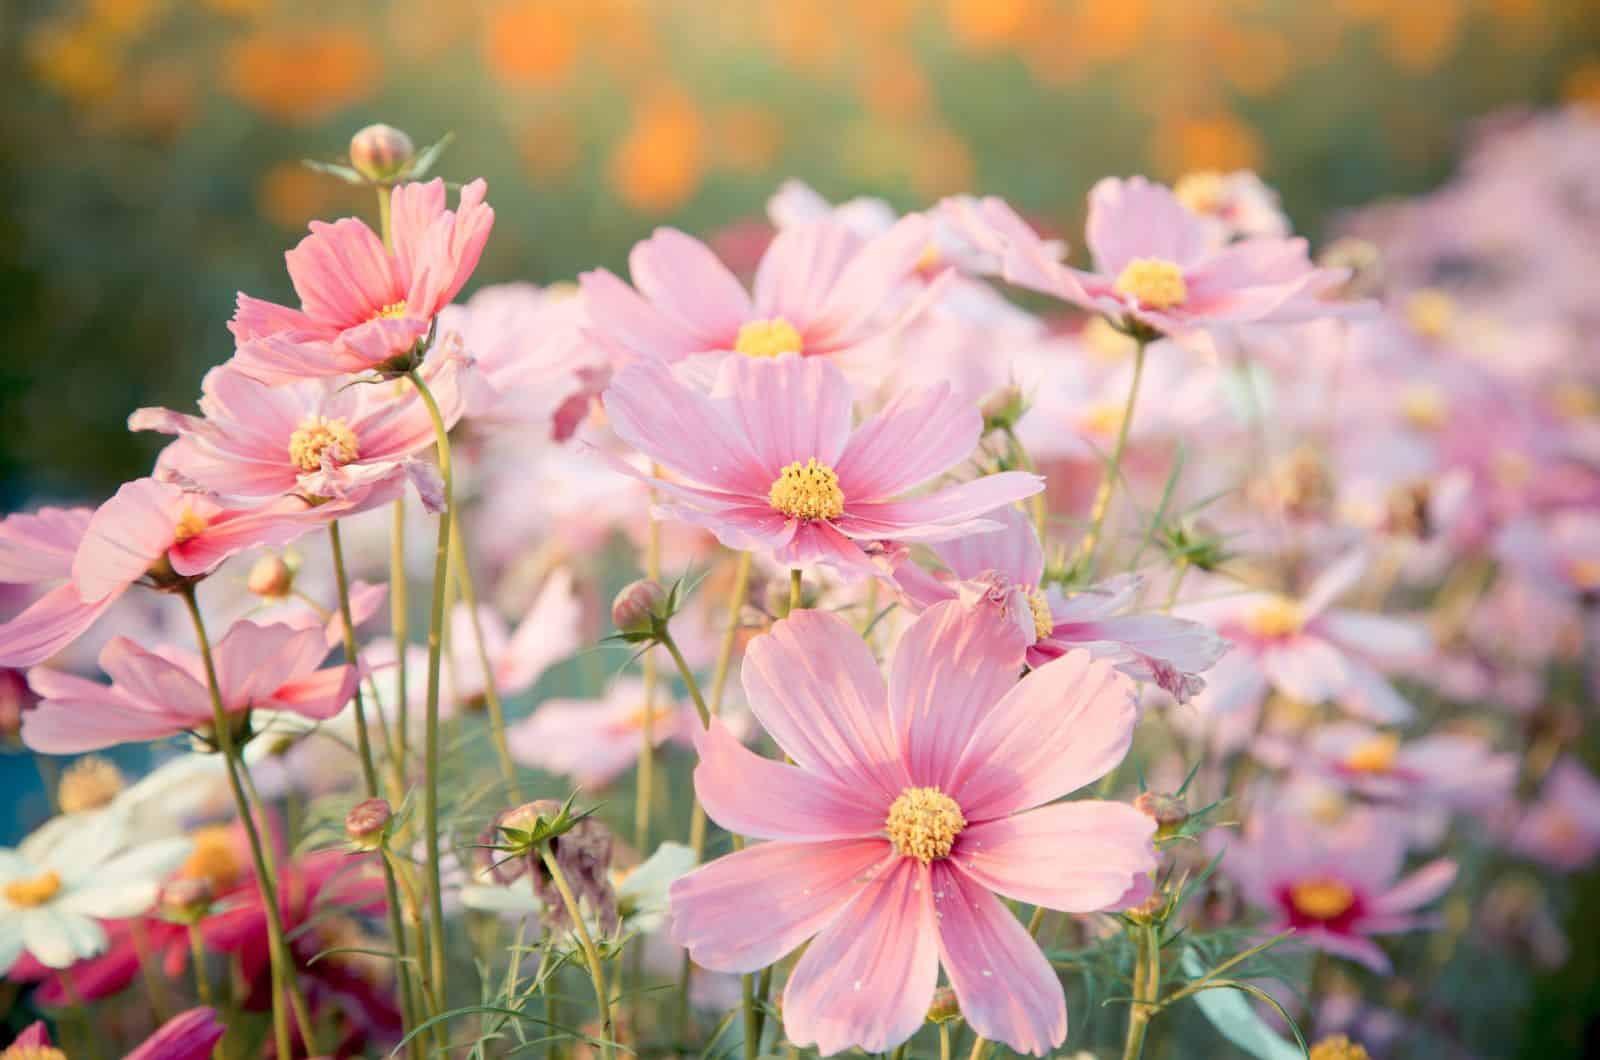 Cosmos Flower Meaning: What Makes This Flower So Special?